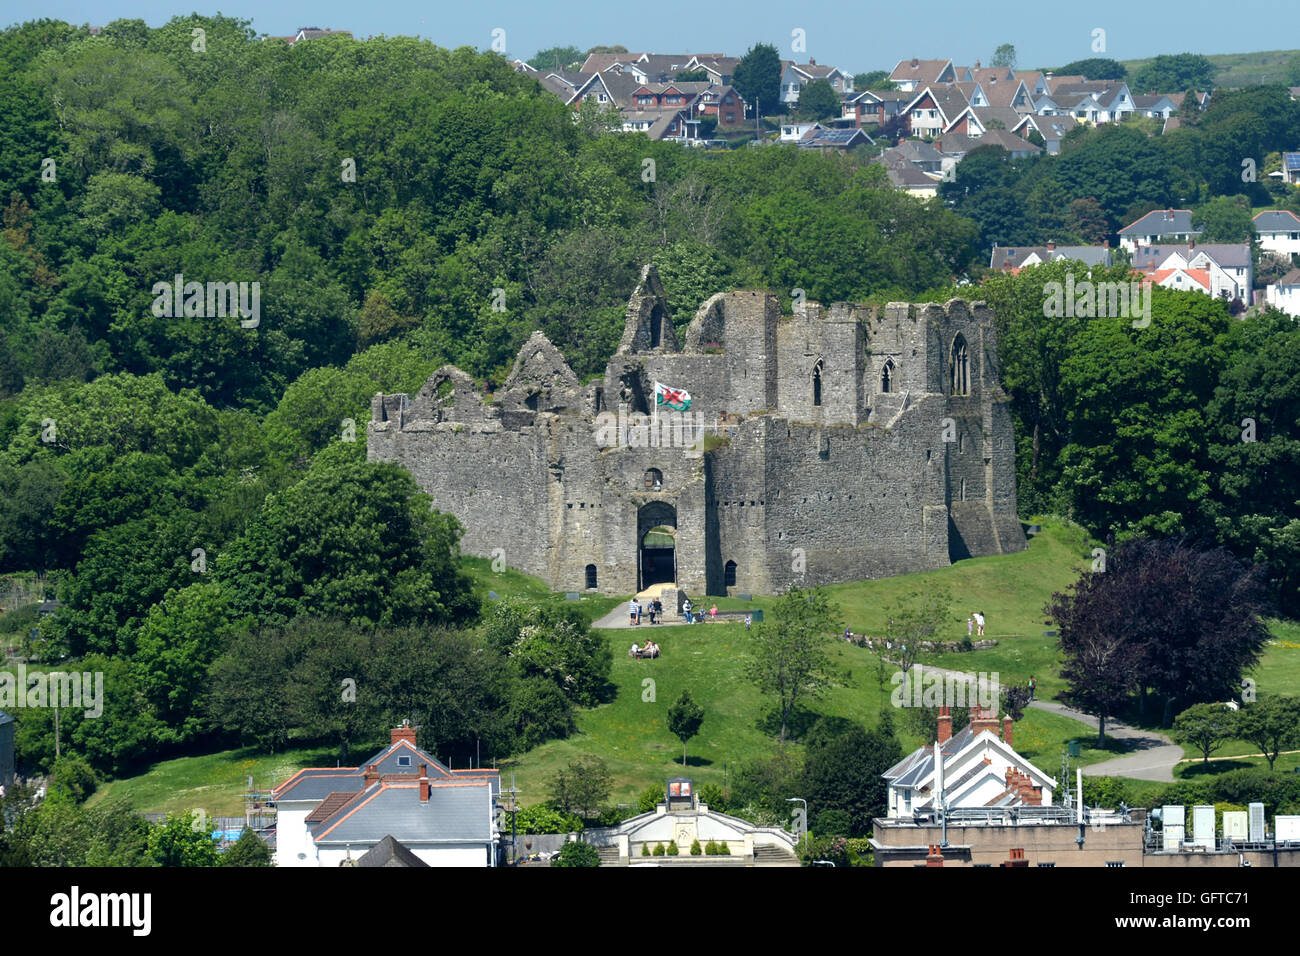 Oystermouth castle overlooking Mumbles village, Swansea, Wales - historic ruins of castle with ramparts,  towers and ancient walls remaining. Stock Photo